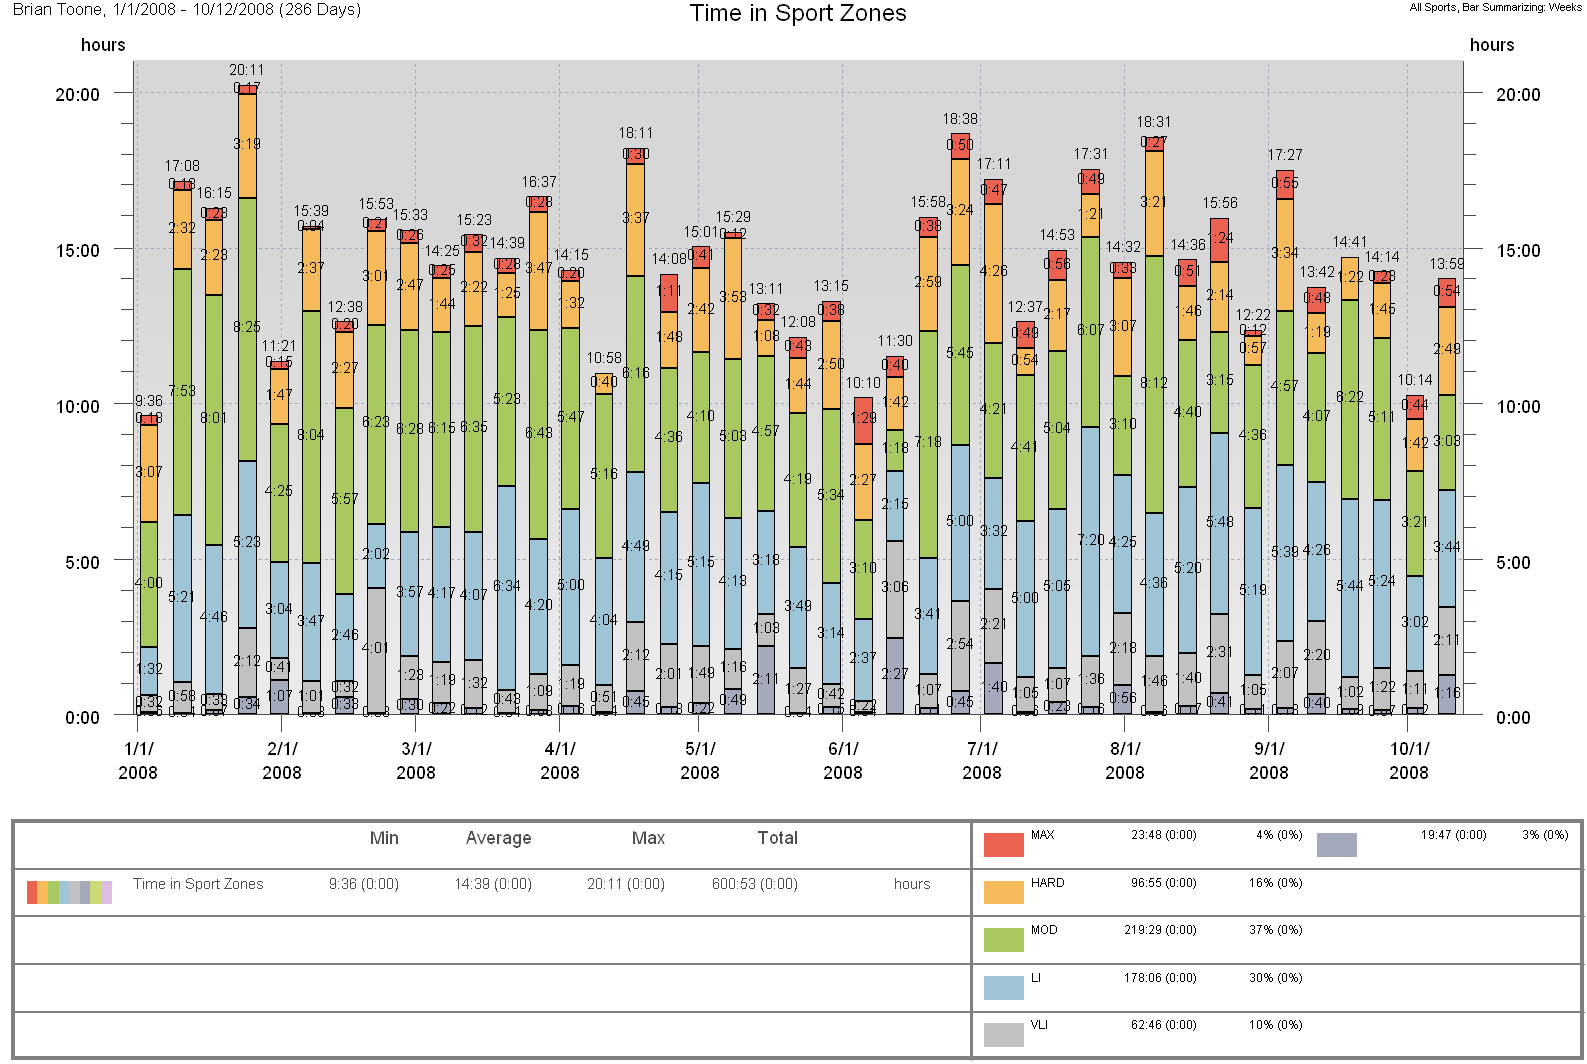 2008 Season review - time spent in heart rate zones